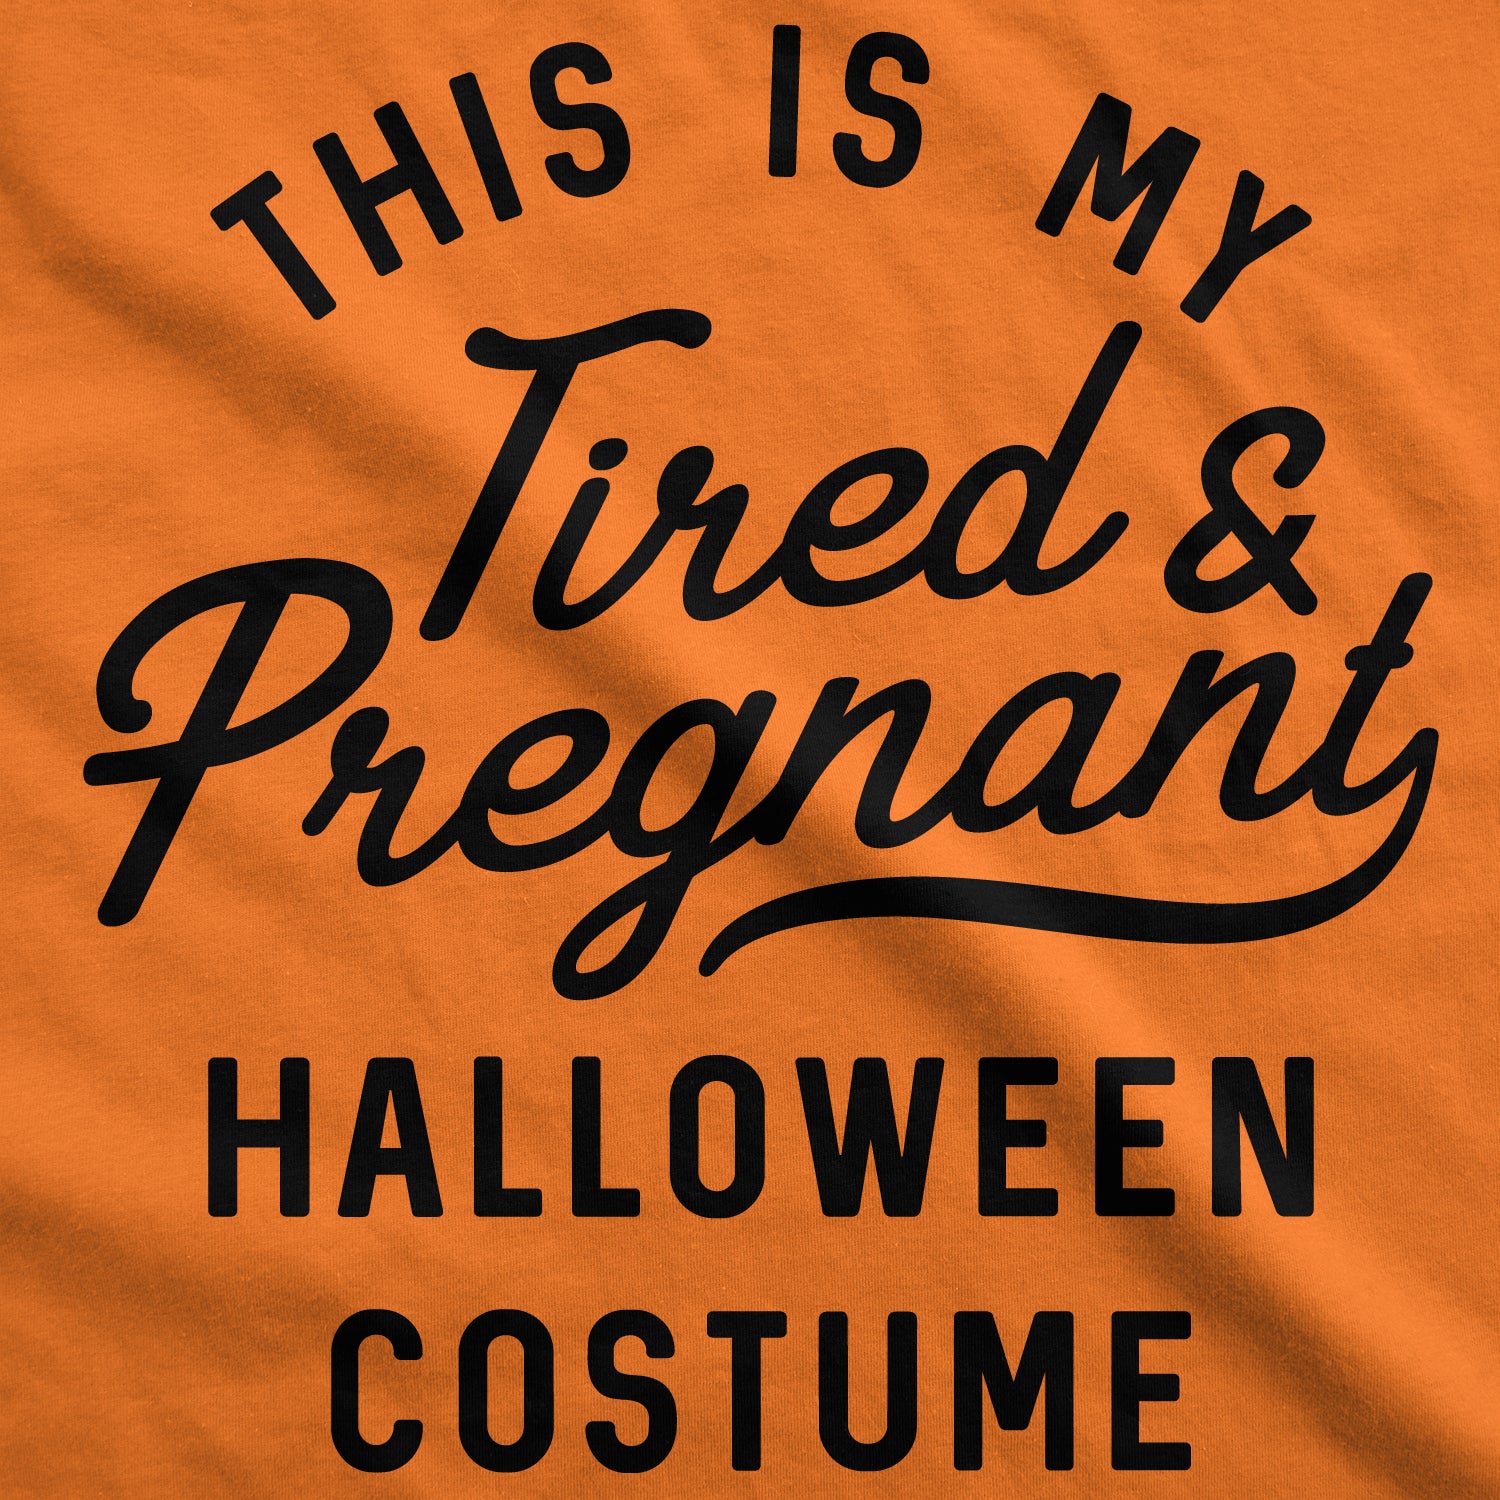 Funny Orange This Is My Tired And Pregnant Halloween Costume Maternity T Shirt Nerdy Halloween Tee